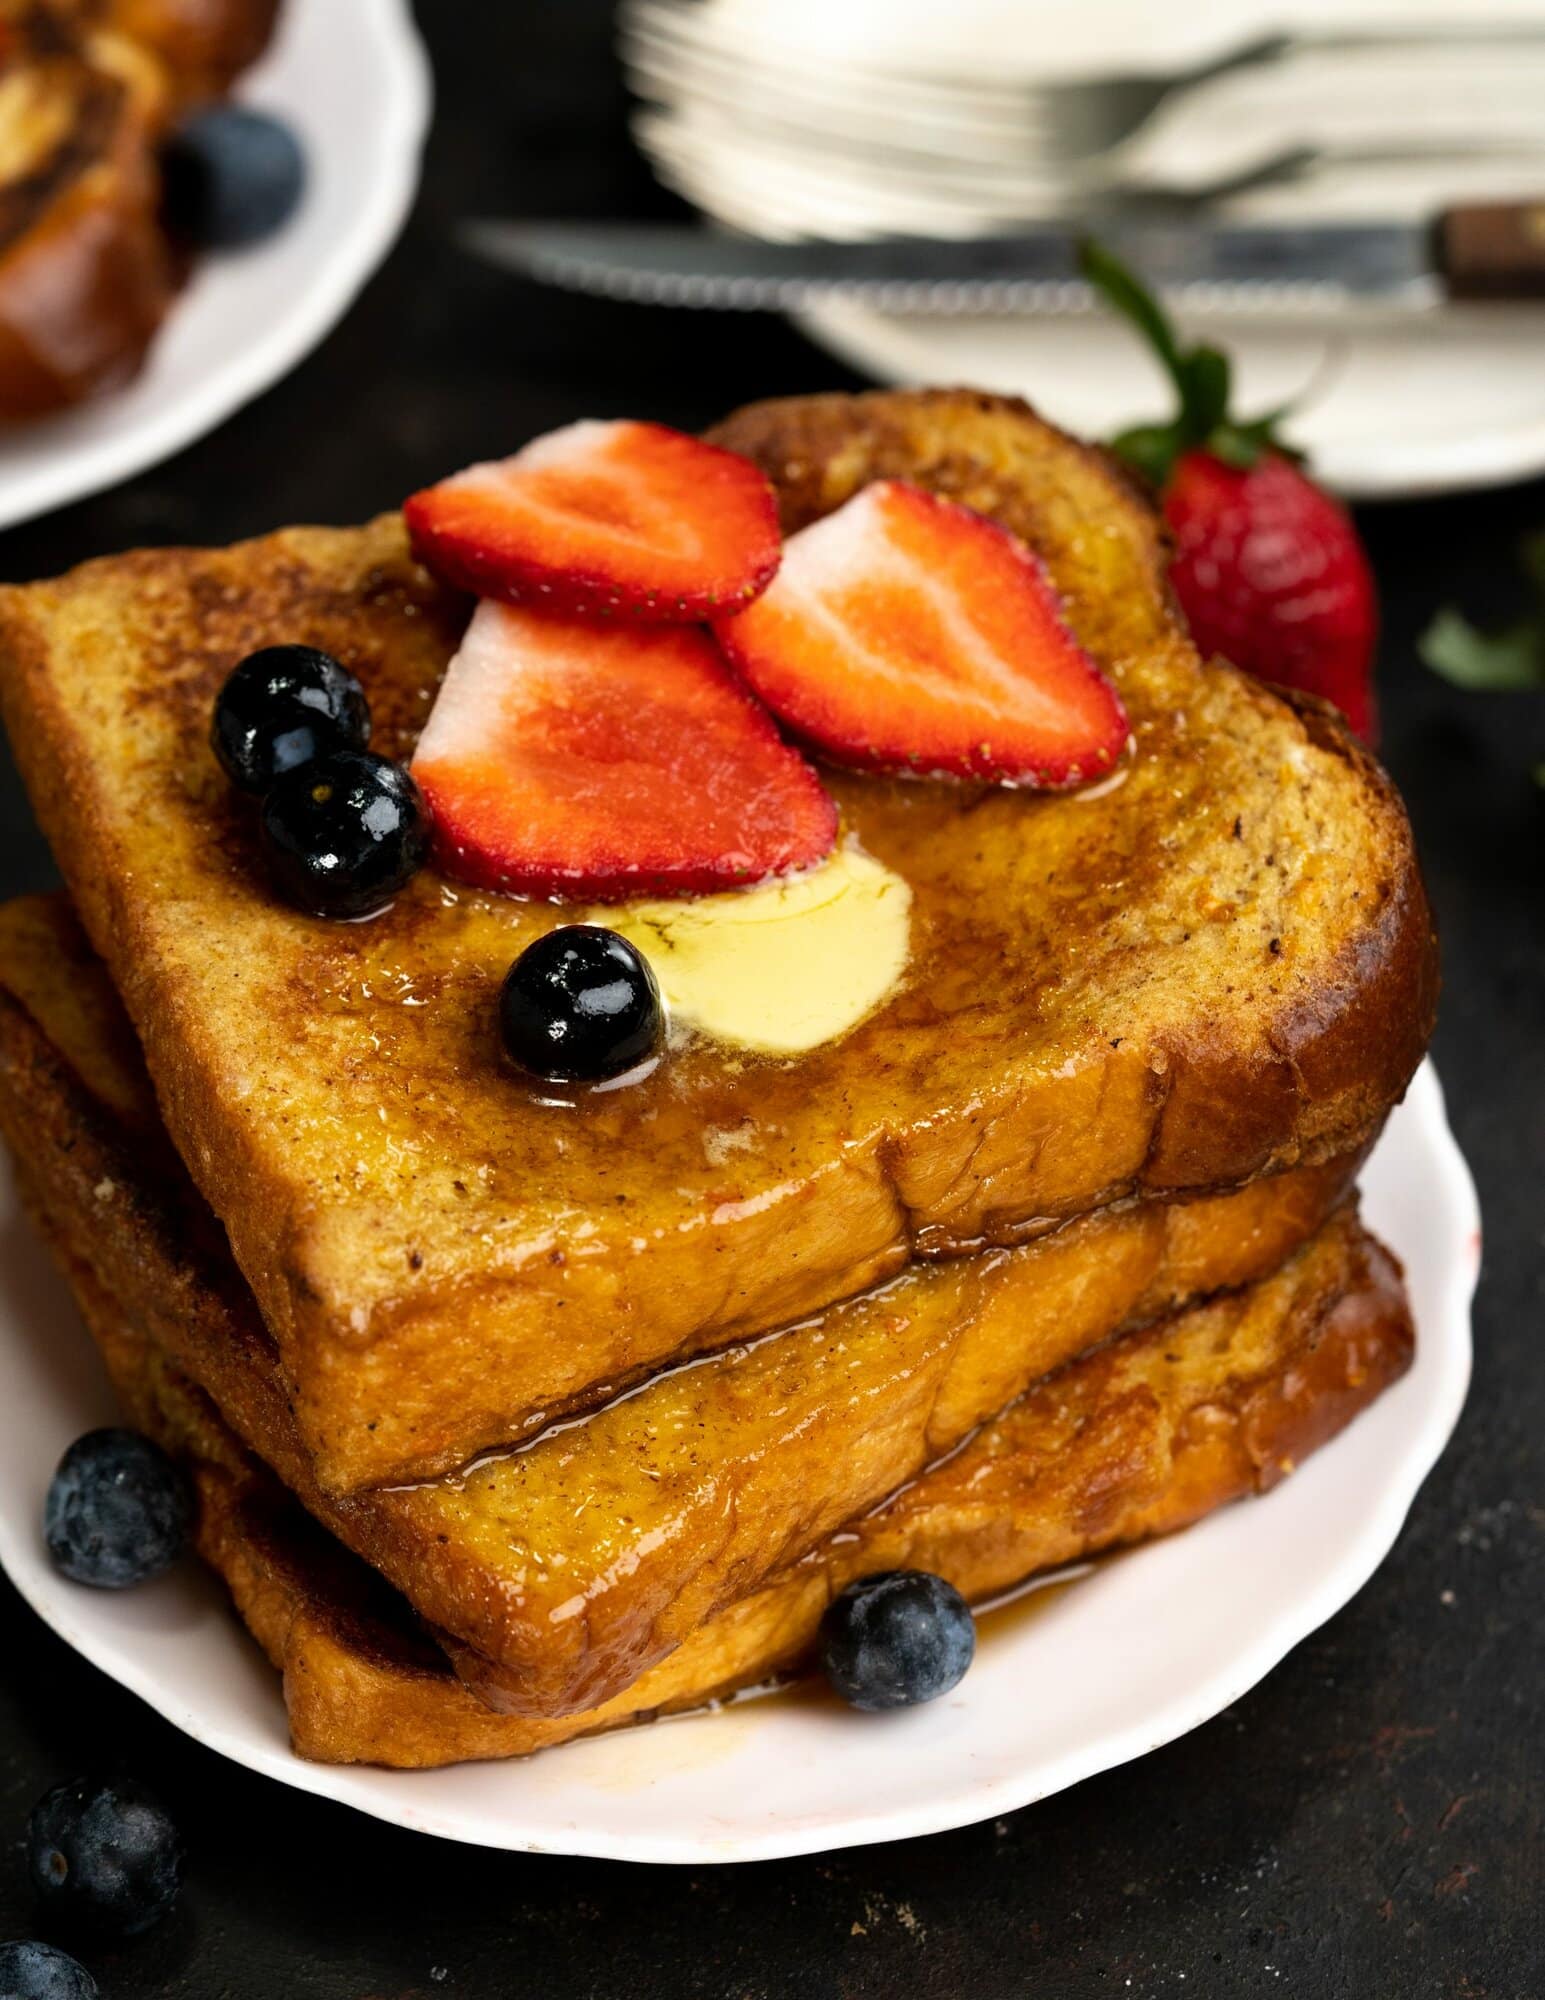 Top view of brioche french toasts served on a white plate and topped with butter, strawberry and blueberry.